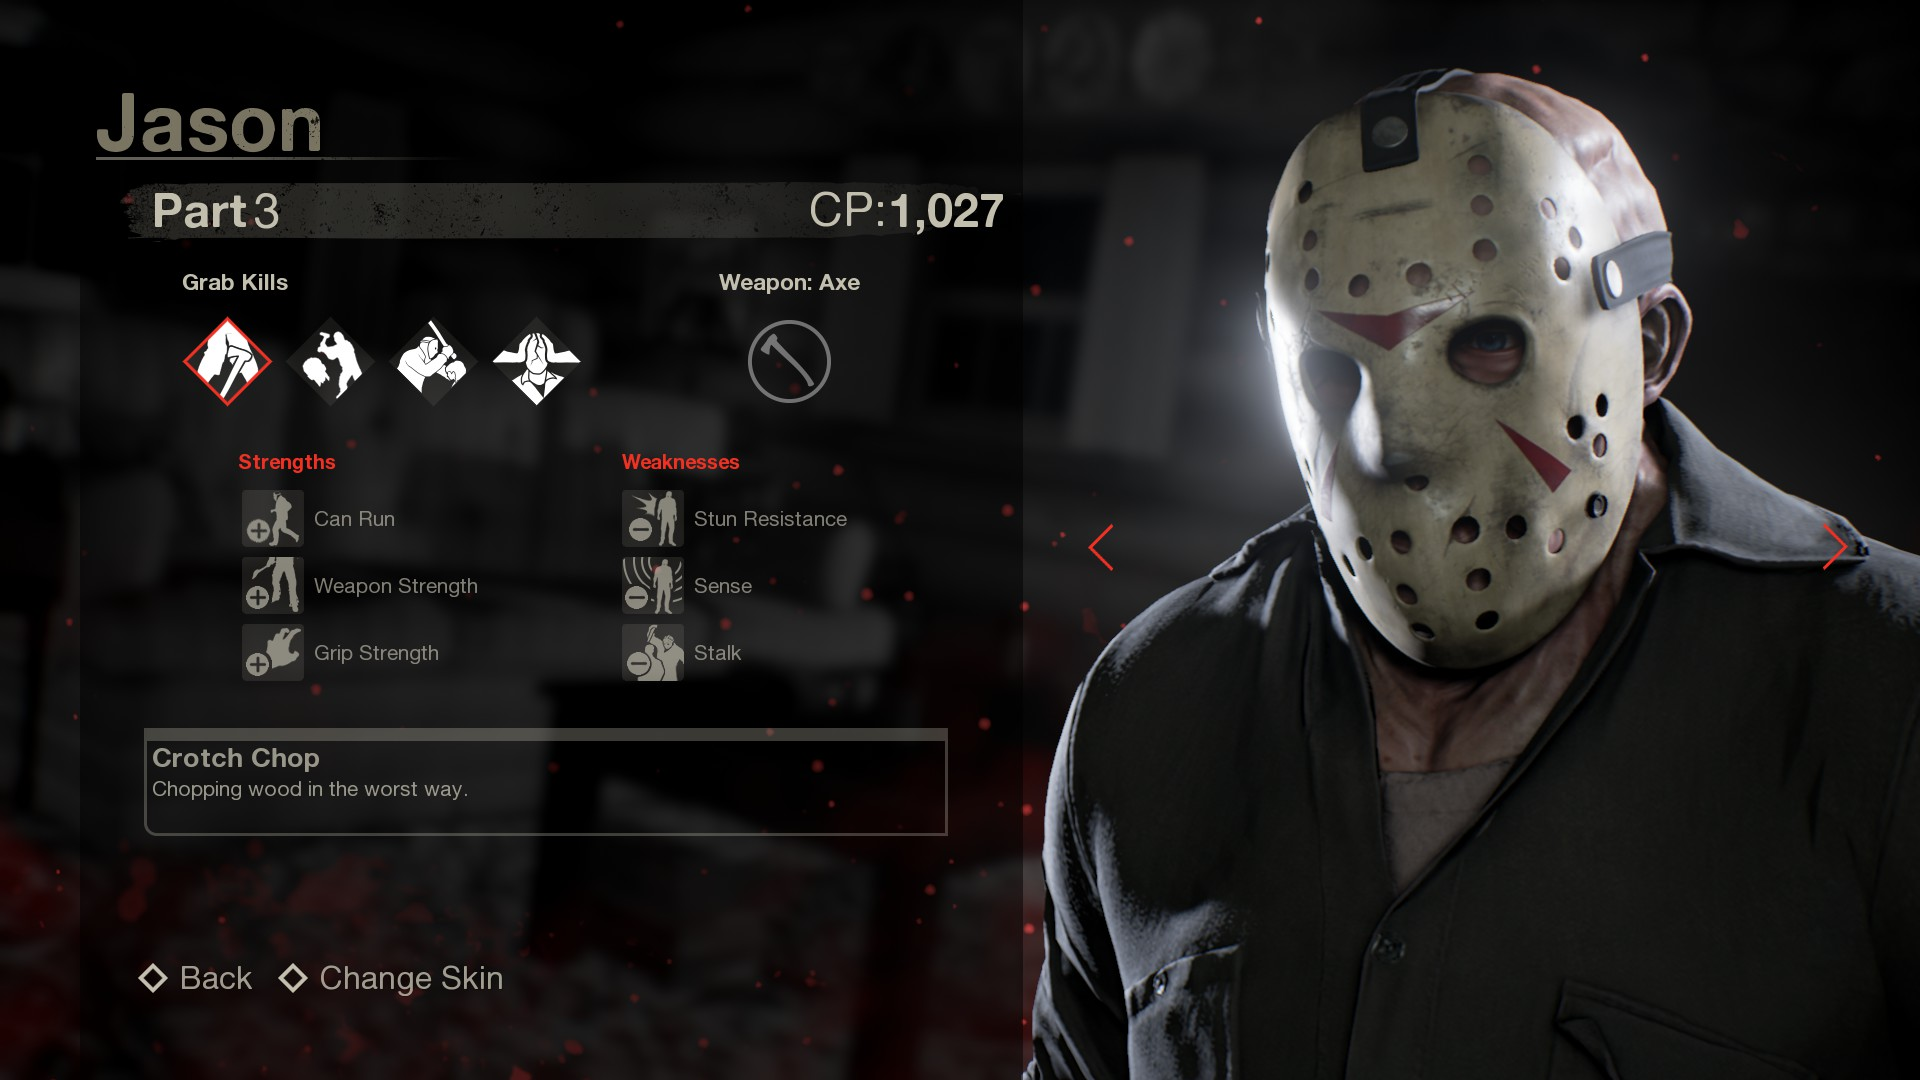 Friday the 13th: The Game Community